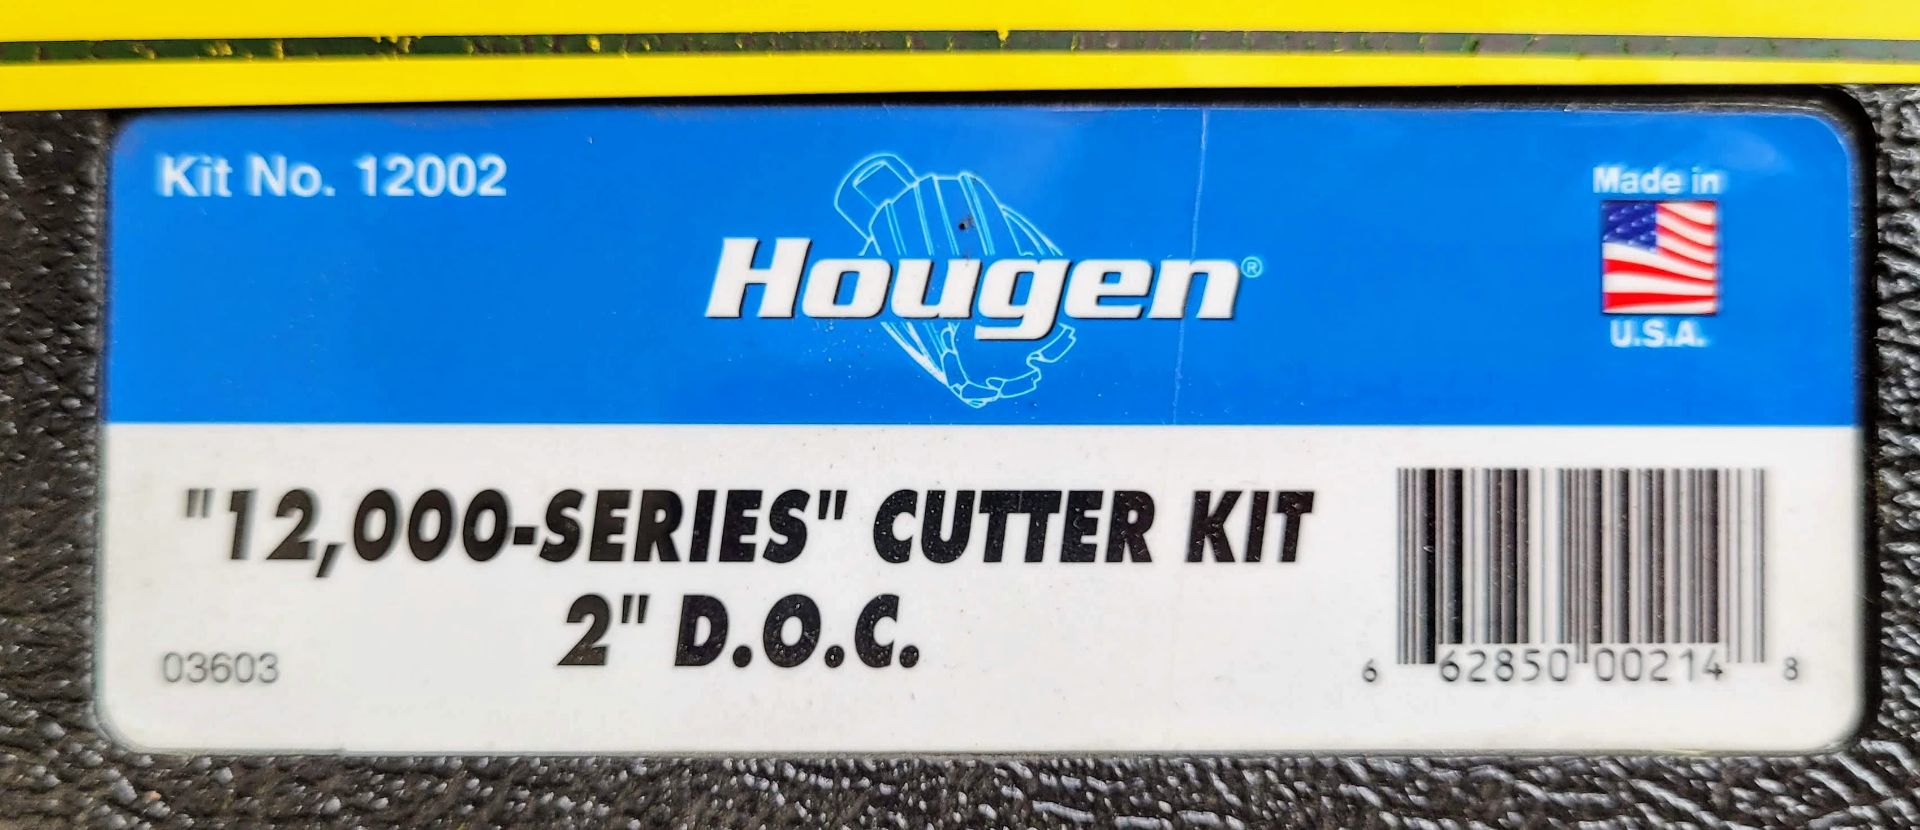 HOUGAN HMD904 MAG DRILL W/ "12,000 SERIES" CUTTER KIT - 2" DOC - Image 4 of 5